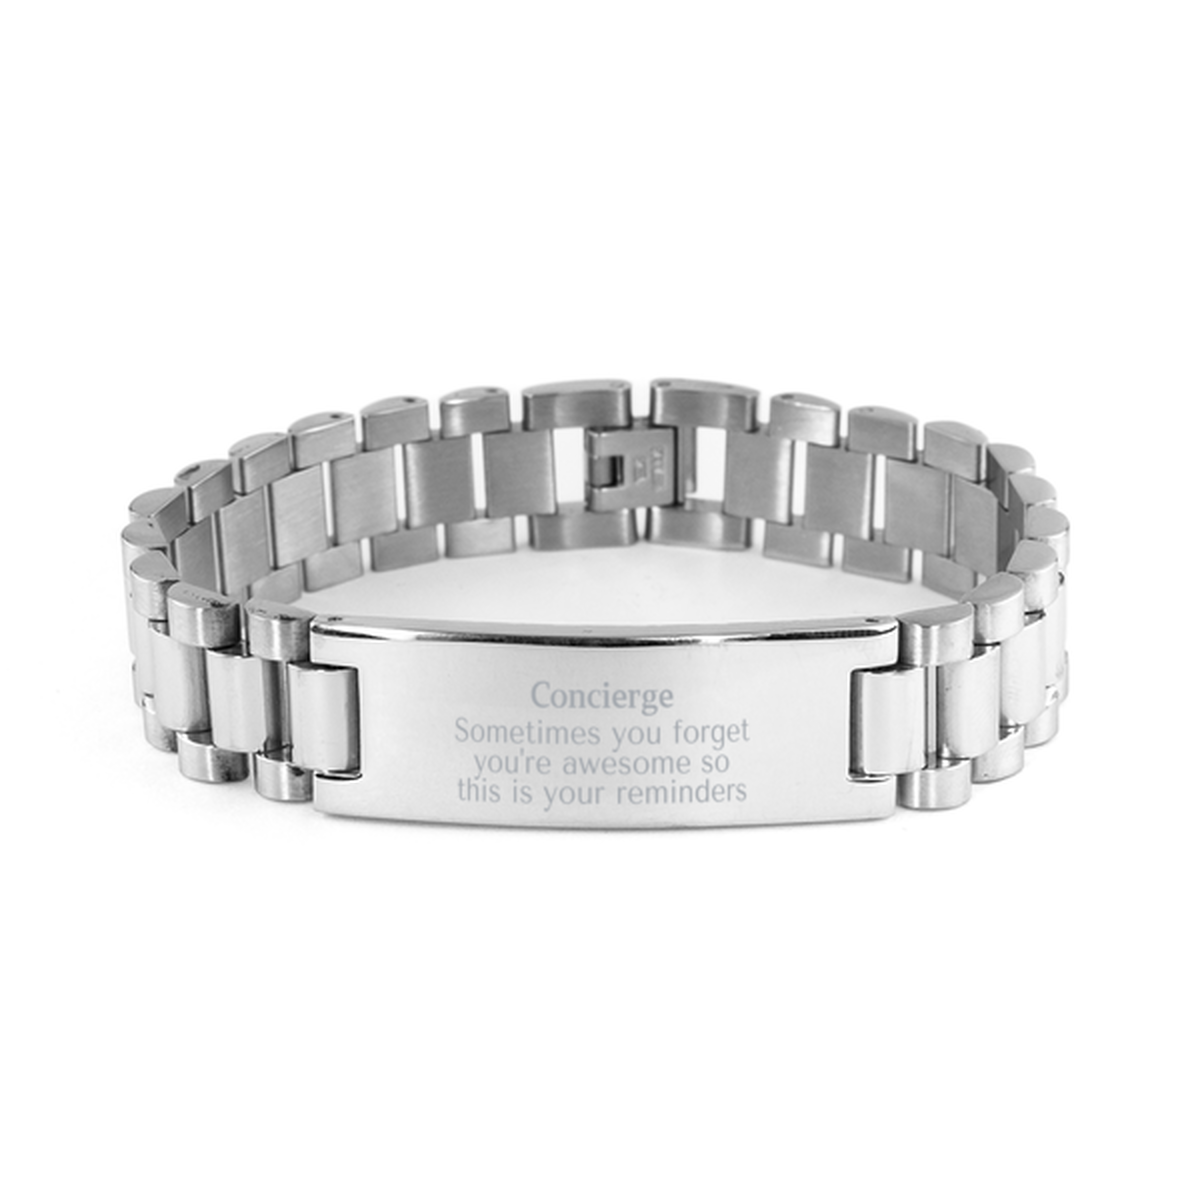 Sentimental Concierge Ladder Stainless Steel Bracelet, Concierge Sometimes you forget you're awesome so this is your reminders, Graduation Christmas Birthday Gifts for Concierge, Men, Women, Coworkers